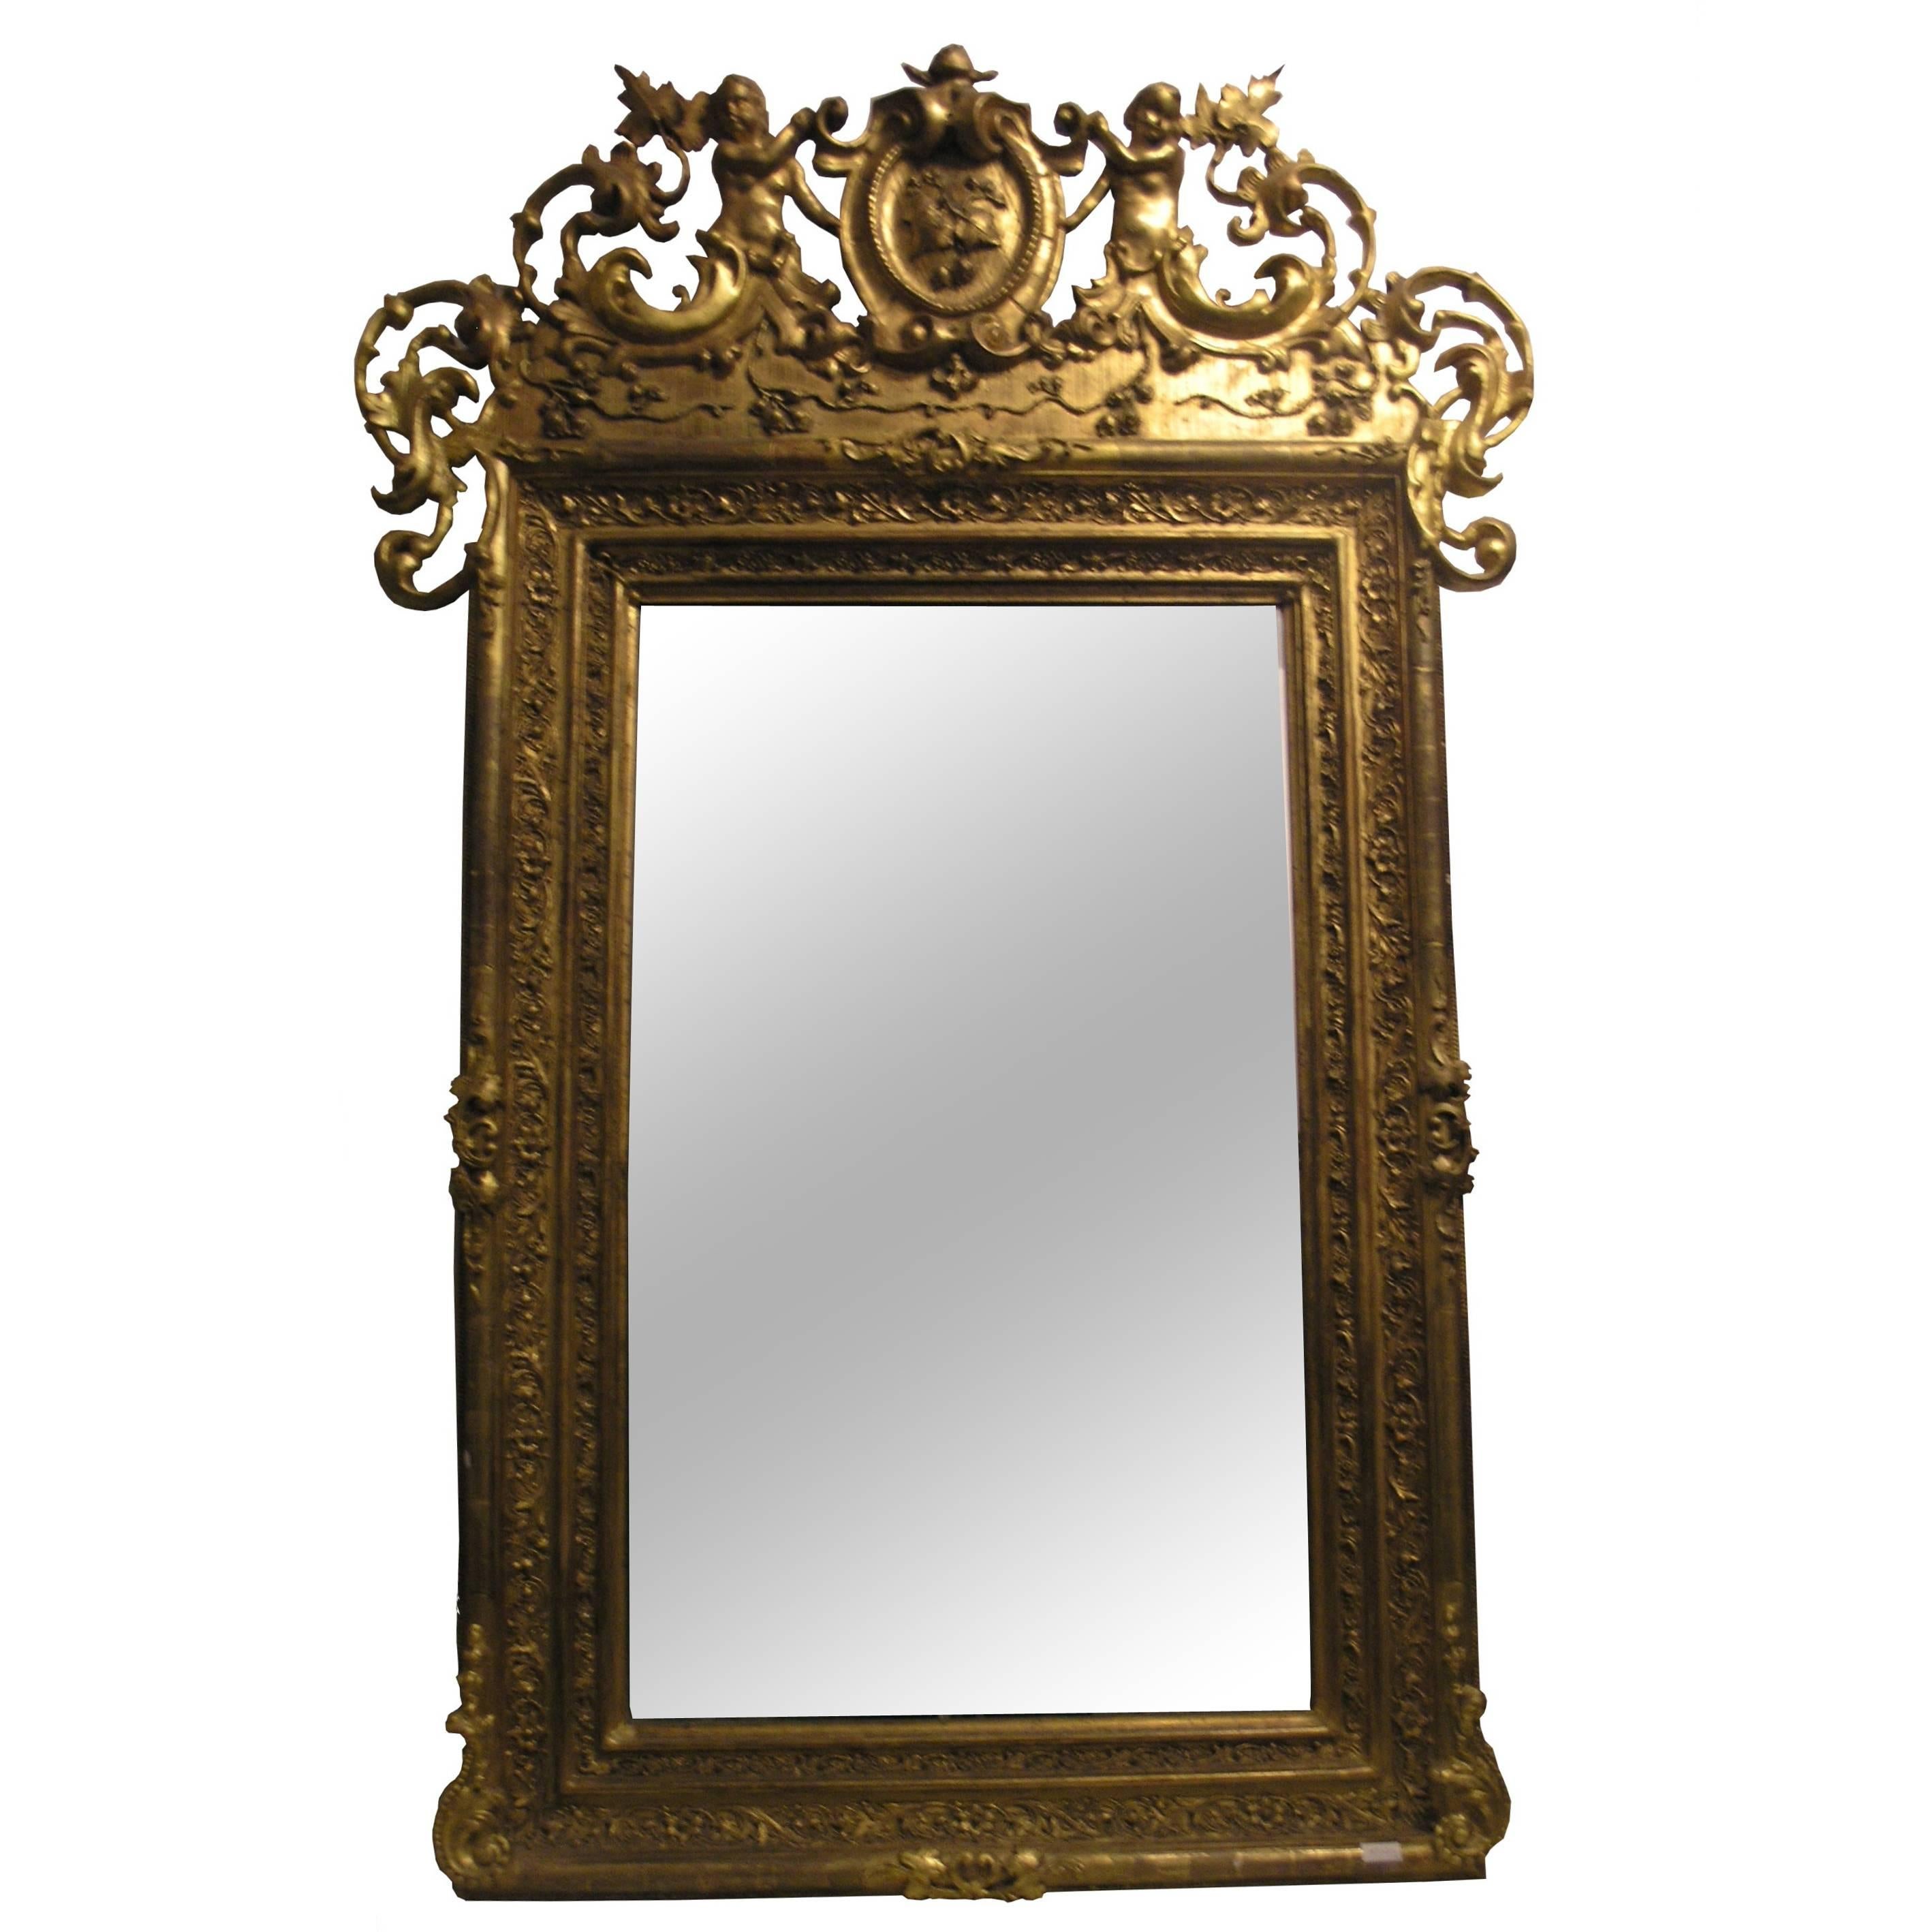 Antique Mirror Decorated with Golden